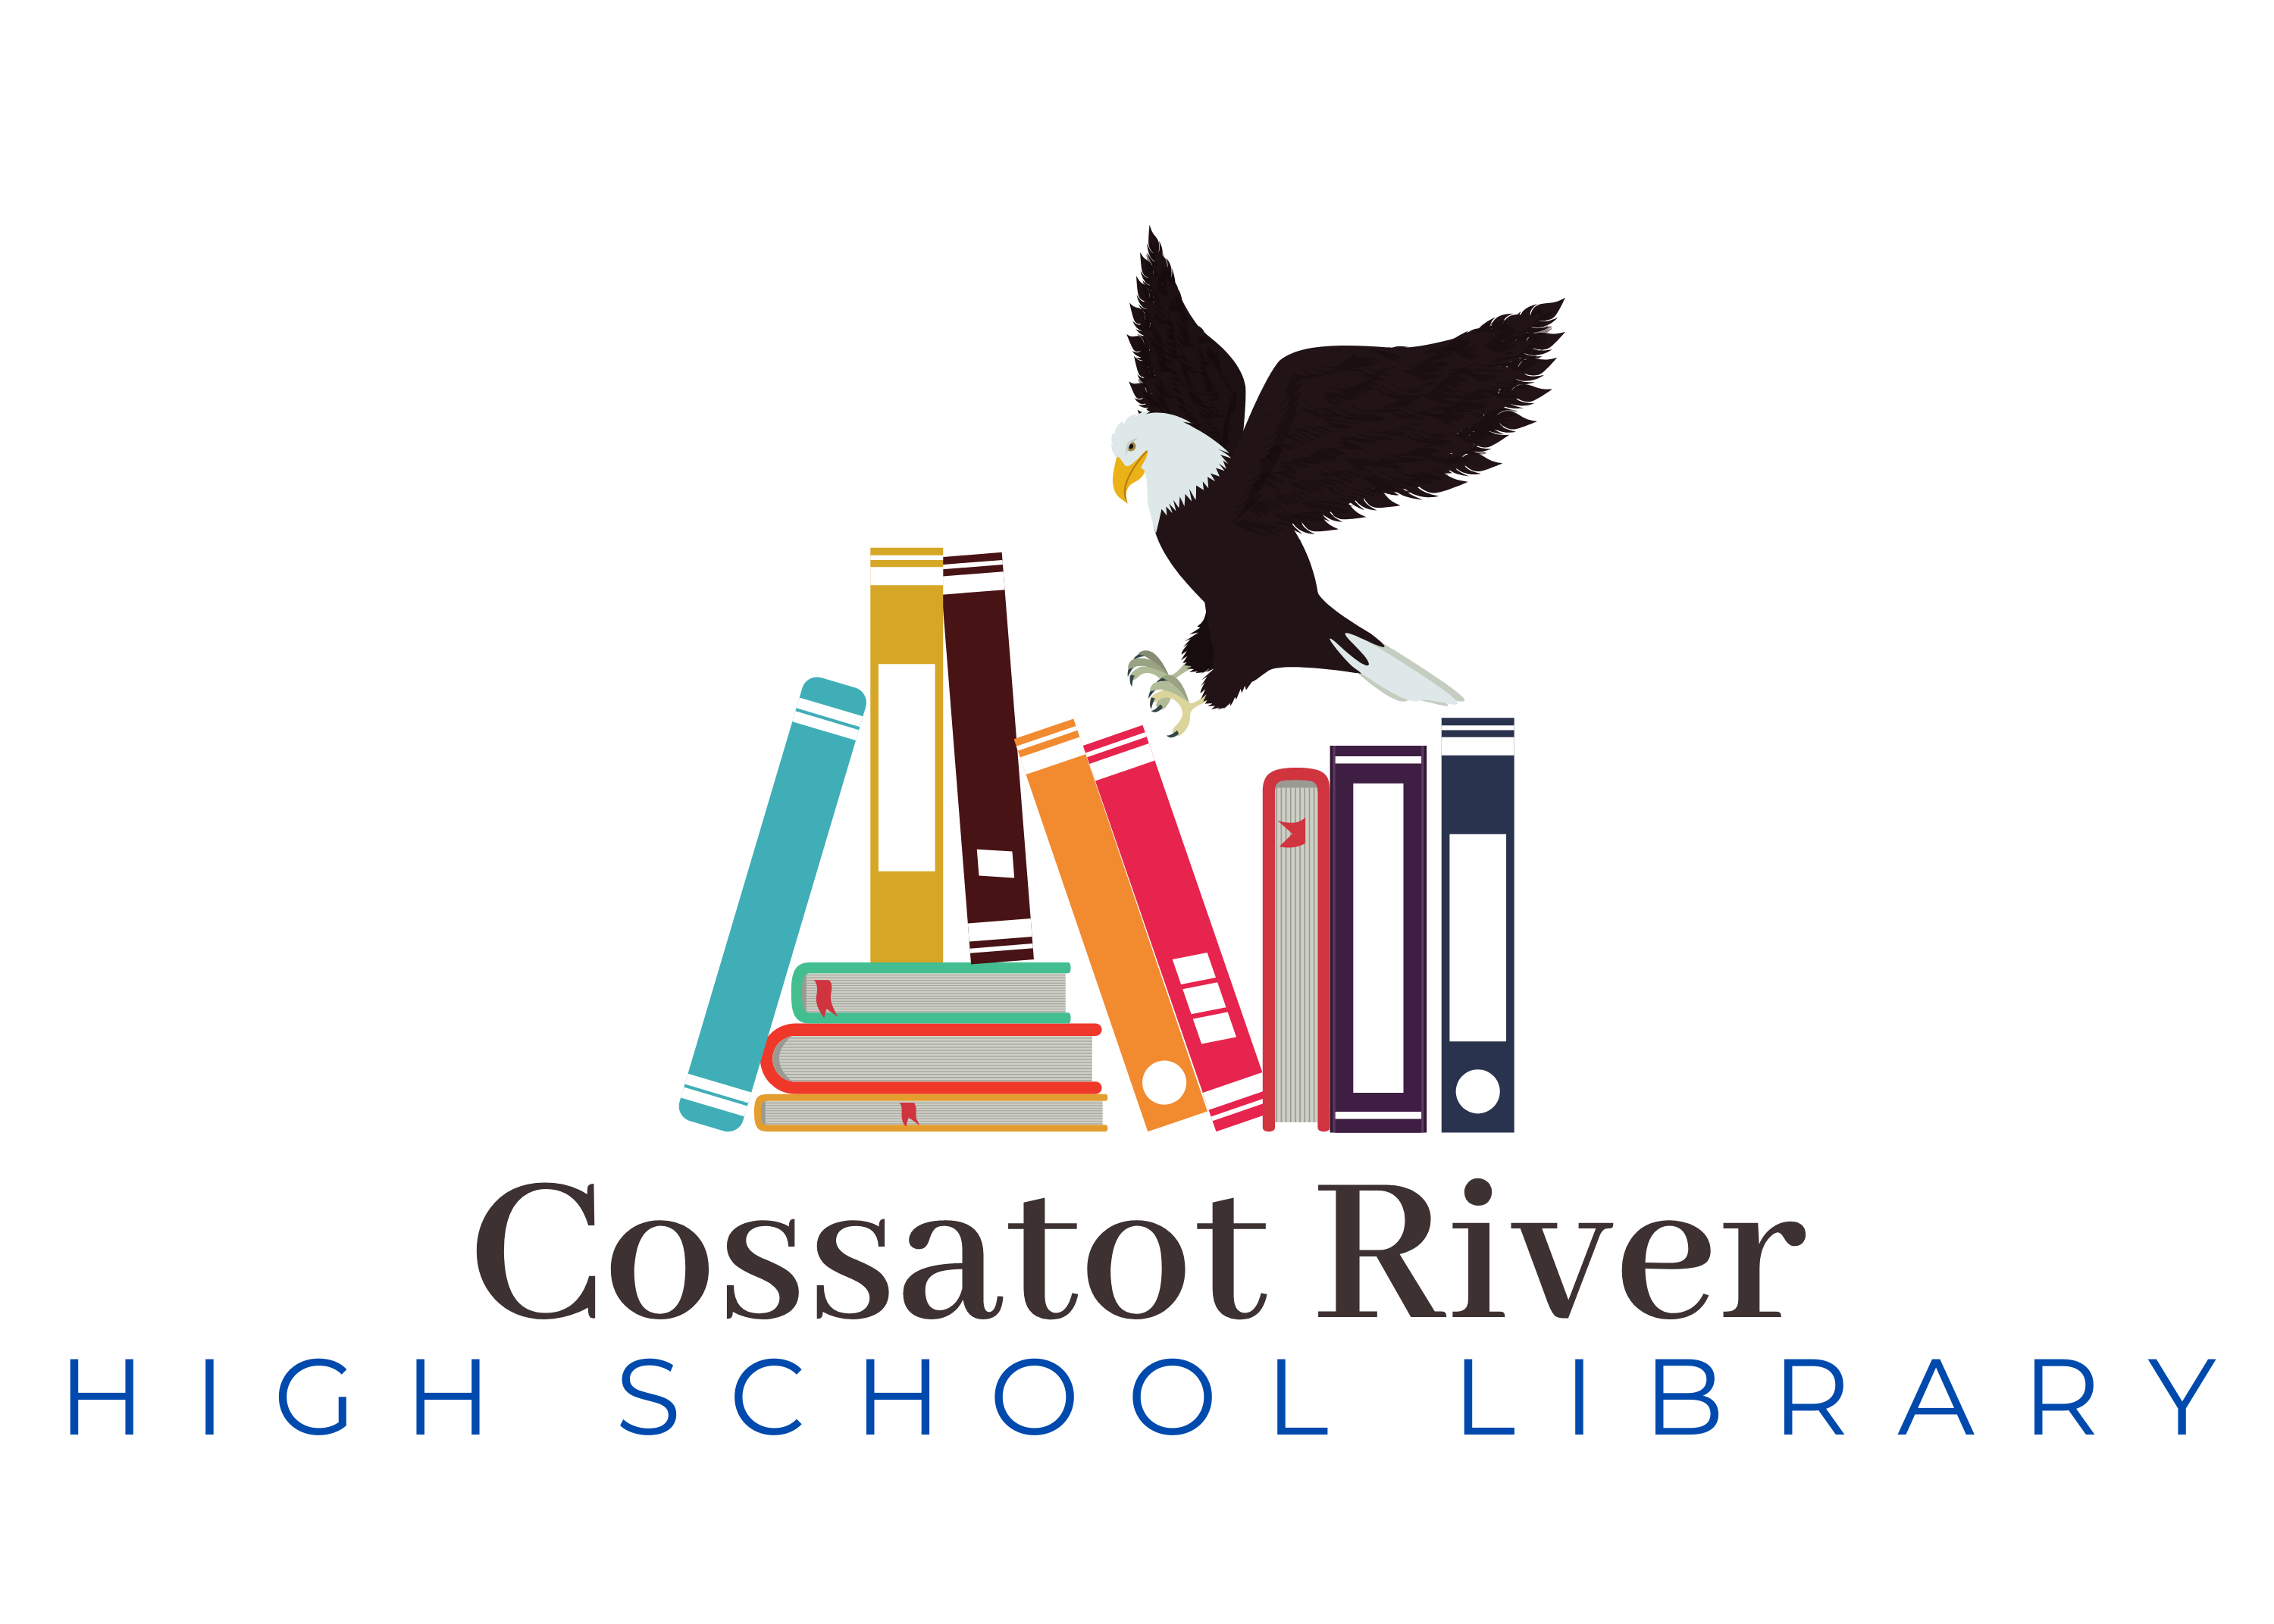 photo of an eagle on books that says cossatot river high school library